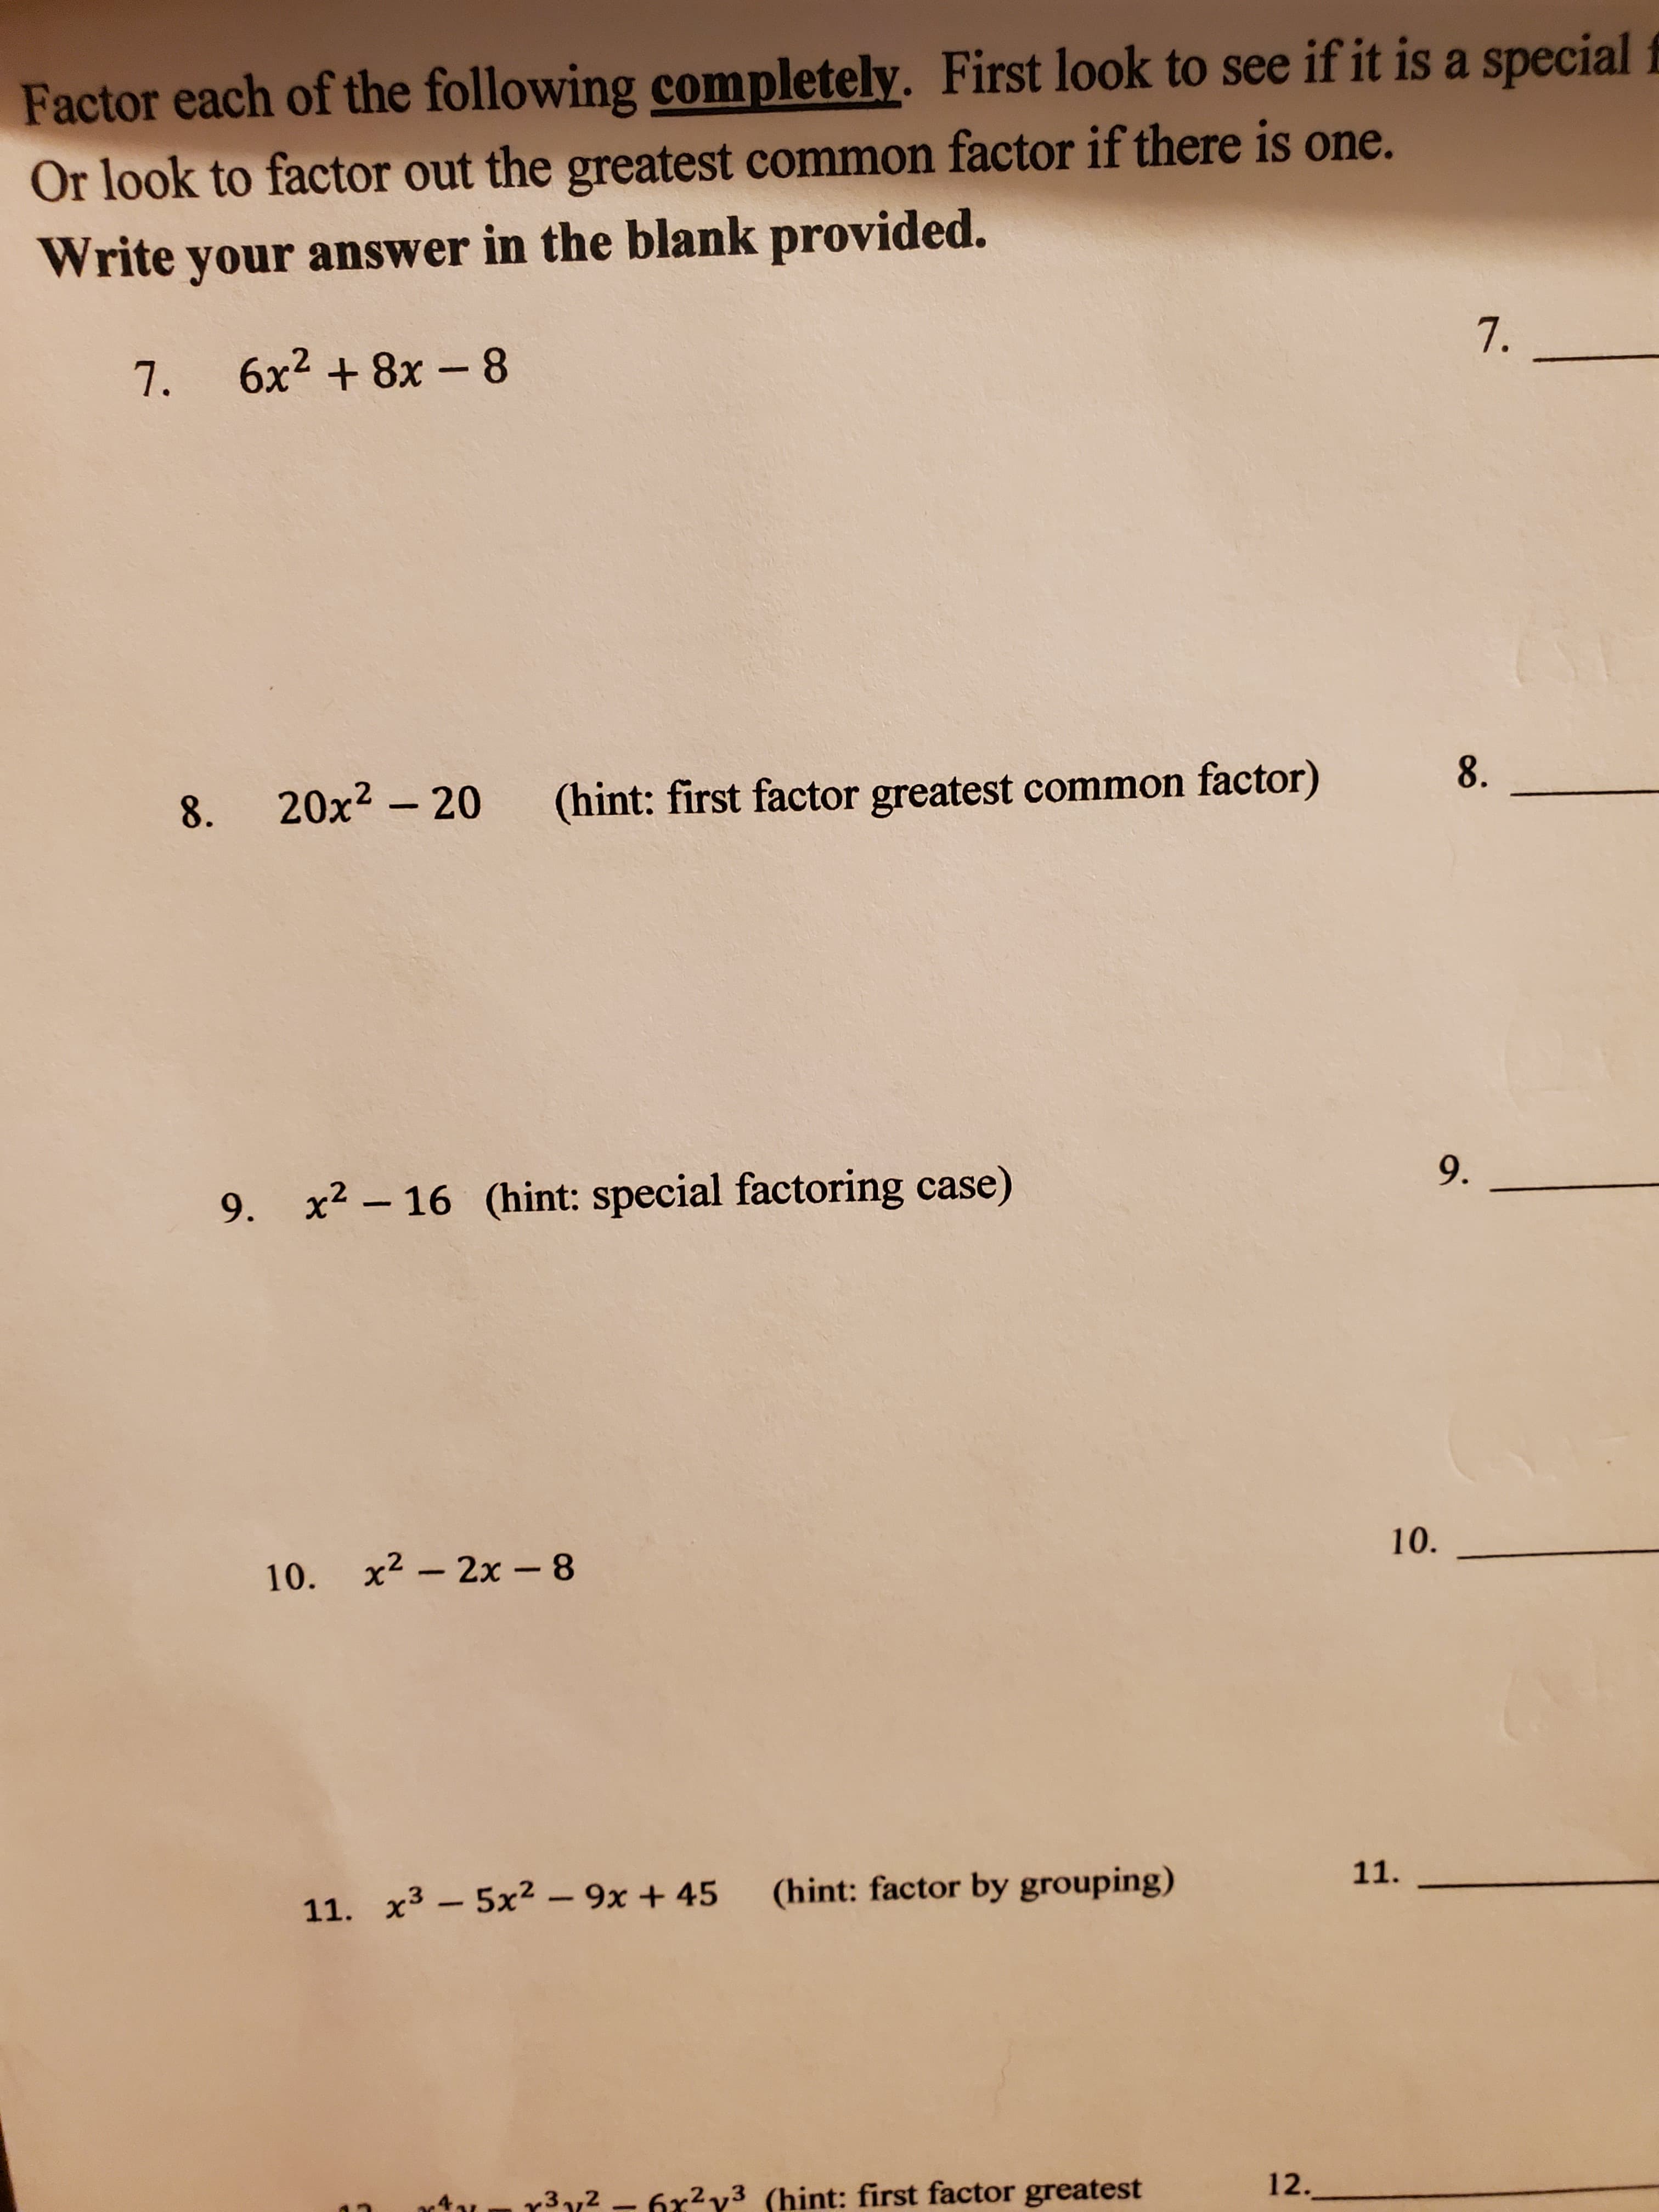 Factor each of the following completely. First look to see if it is a special f
Or look to factor out the greatest common factor if there is one.
Write your answer in the blank provided.
7. 6x2 + 8x-8
7.
8.
20x2 - 20
(hint: first factor greatest common factor)
8.
9. x2 - 16 (hint: special factoring case)
9.
10. x2 – 2x - 8
10.
11. x3 - 5x2 – 9x + 45
(hint: factor by grouping)
11.
r3y2 - 6x2y3 (hint: first factor greatest
12.
